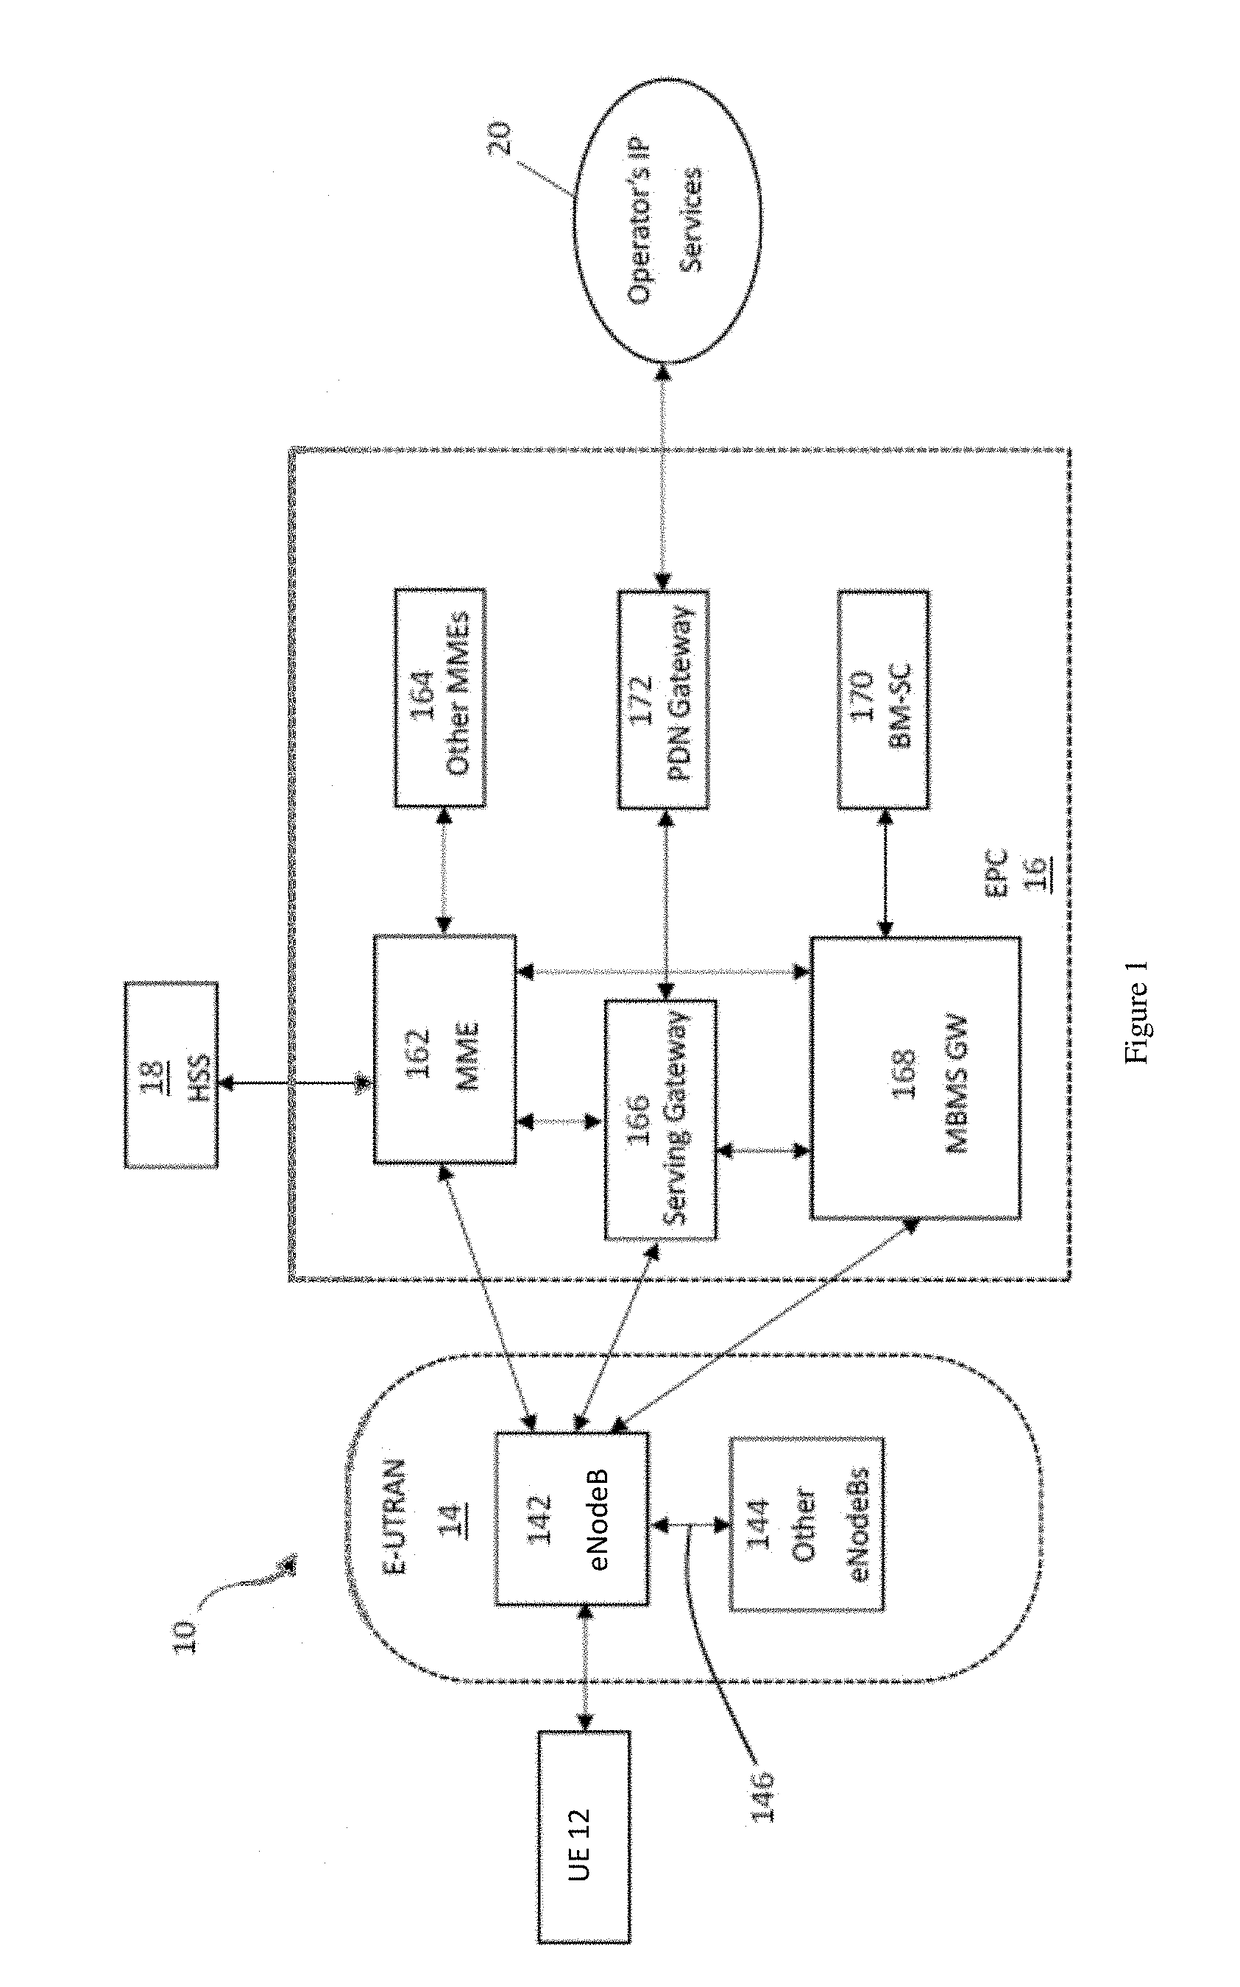 Method and Apparatus for Channel State Information (CSI) Reporting in a Massive MIMO Communications System